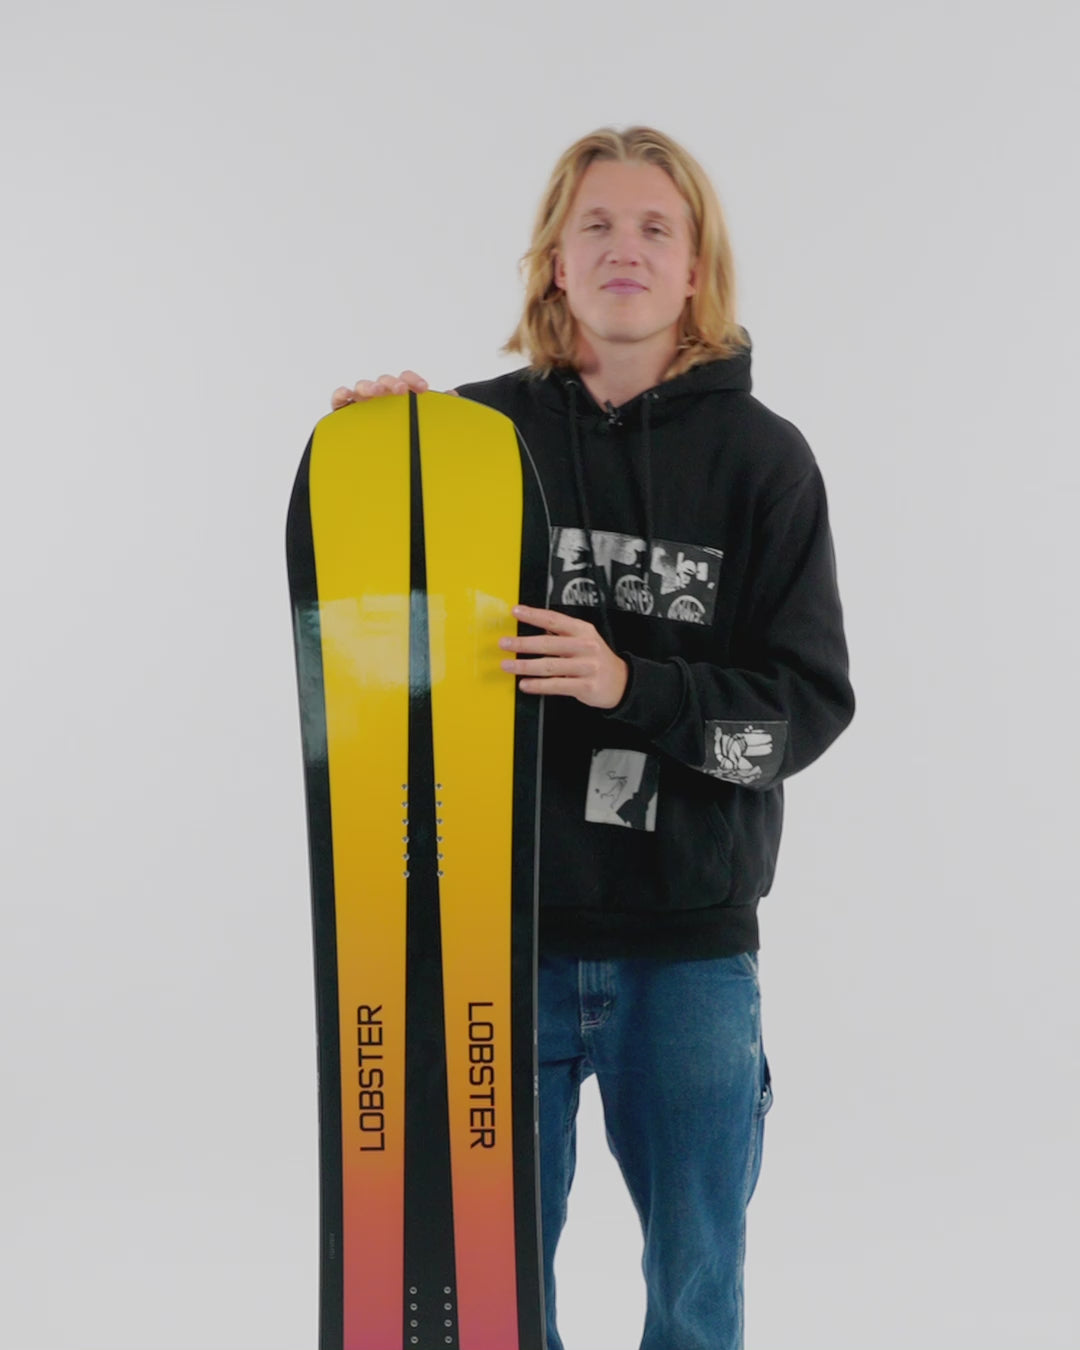 Video of Fridge talking about the Sender mens snowboard by lobster